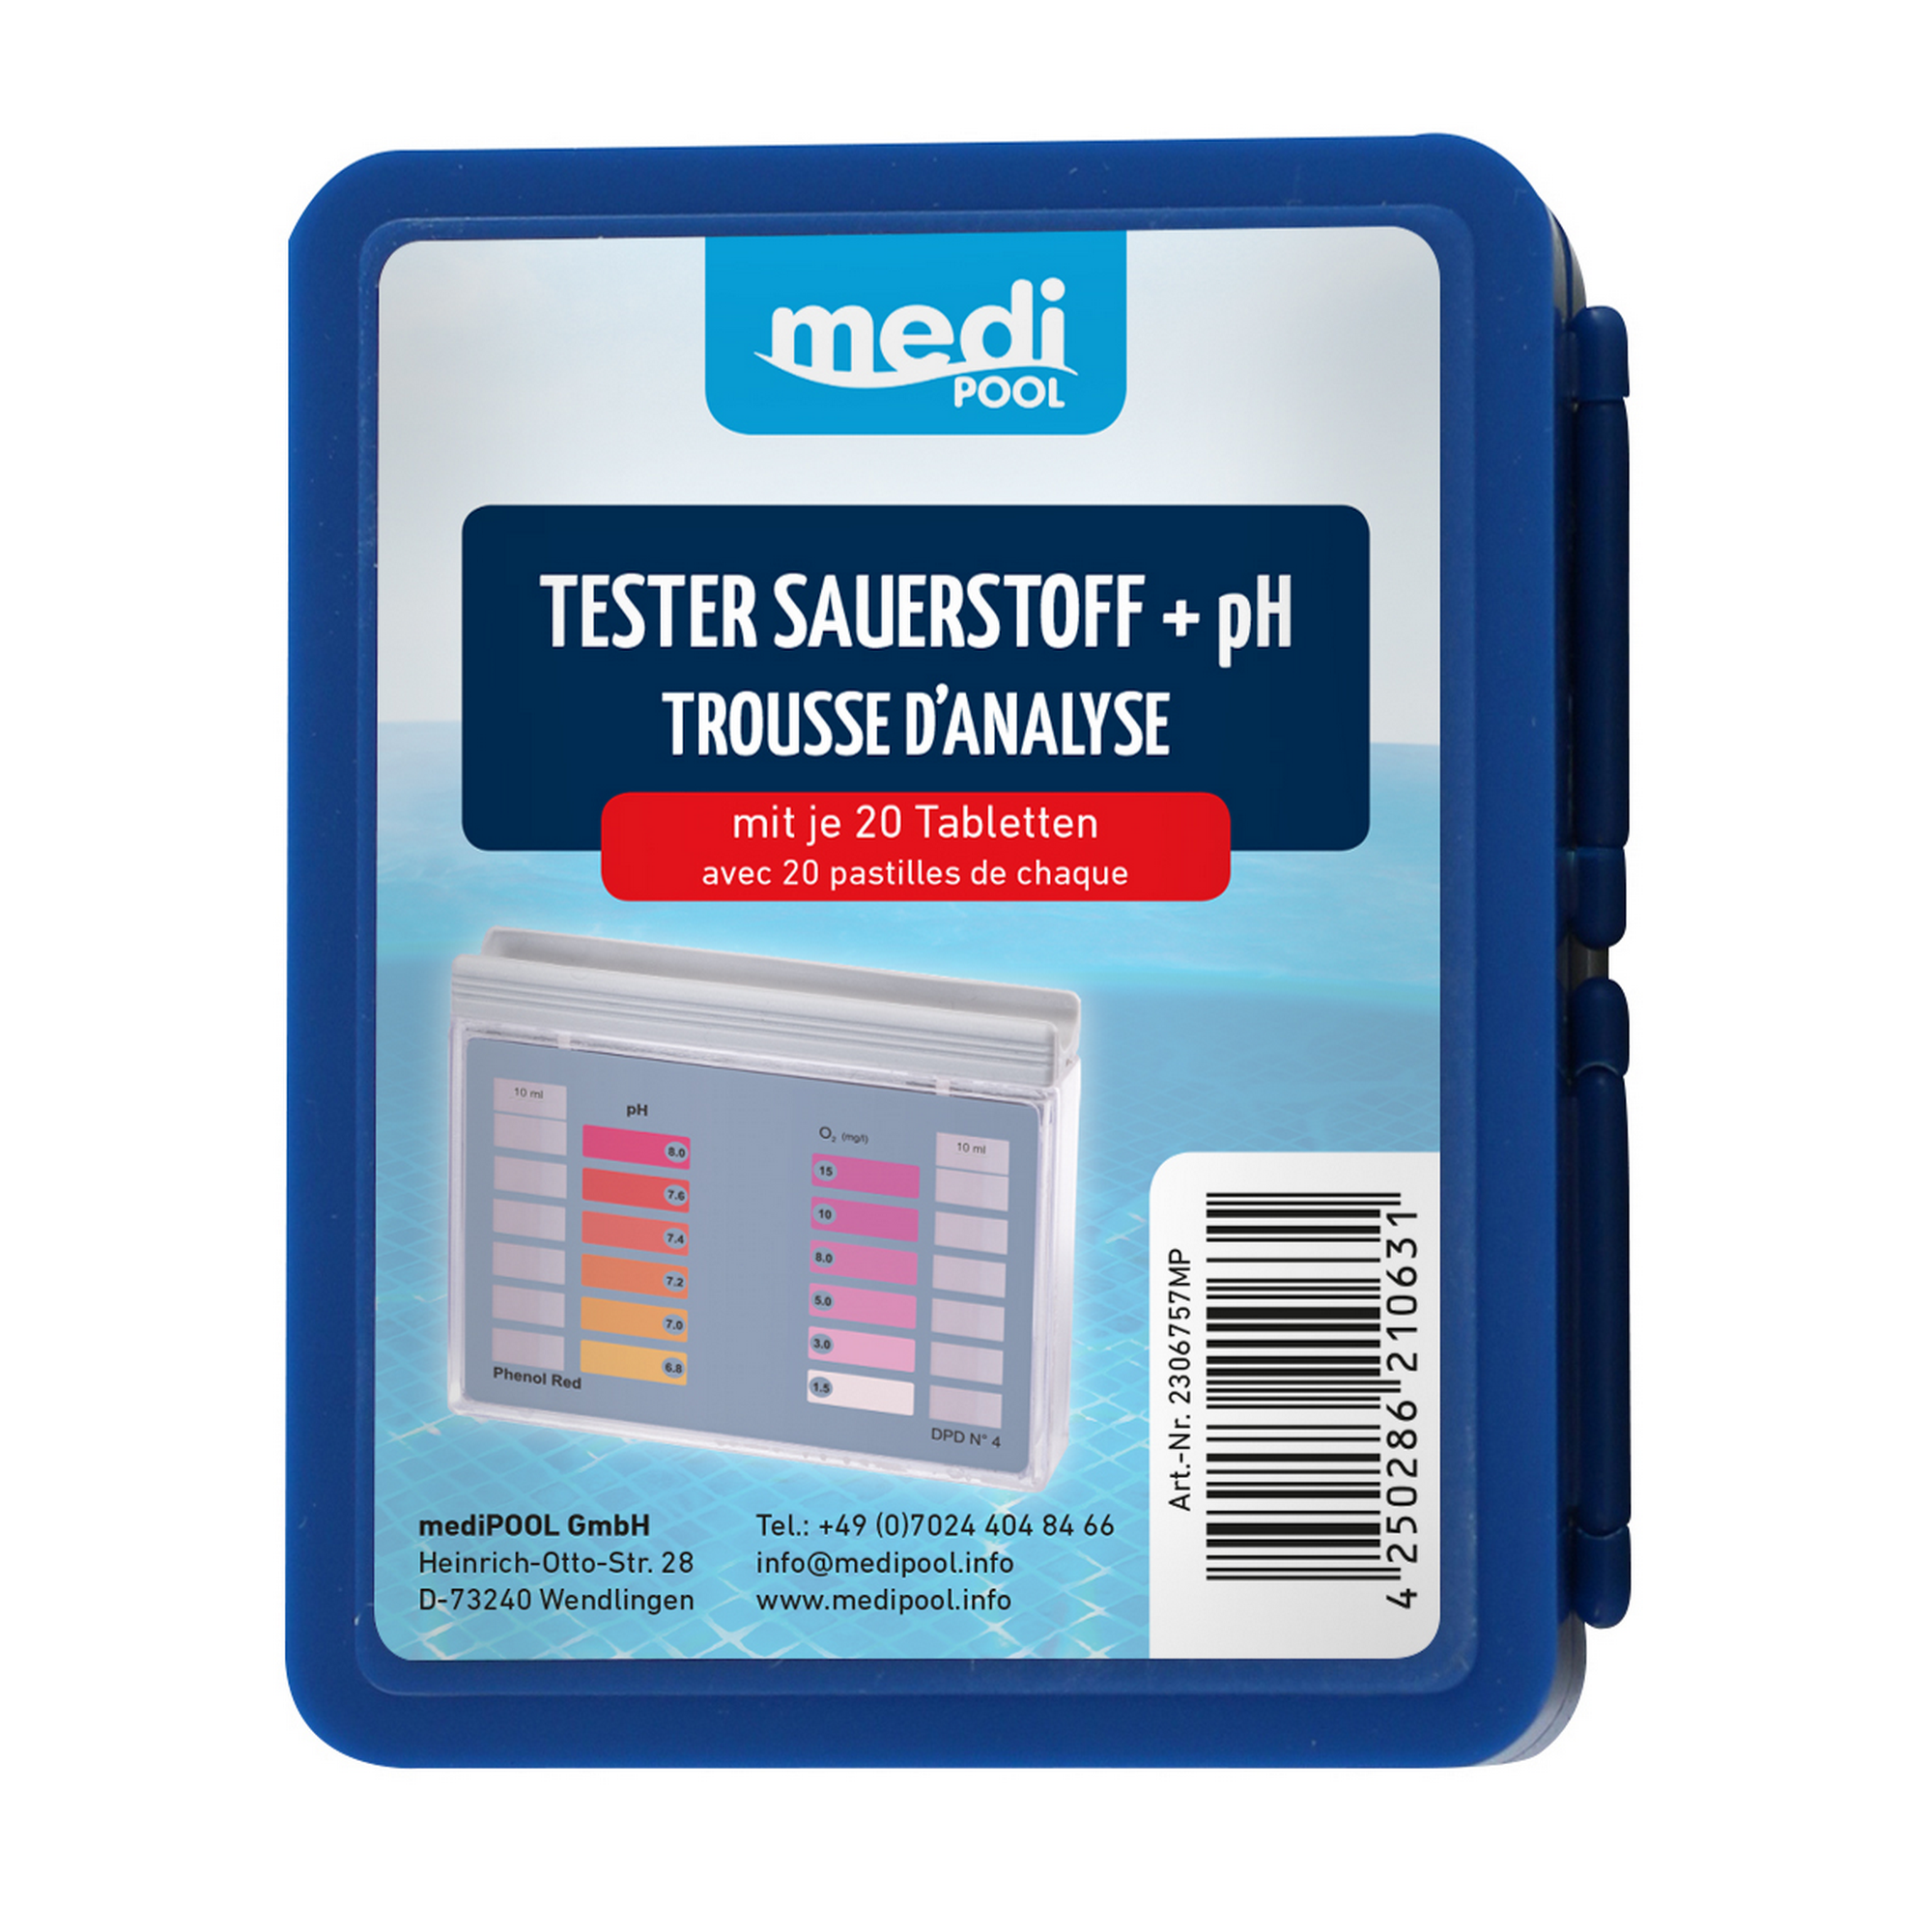 Pool-Tester Sauerstoff/pH-Wert, 2 x 20 Tabletten + product picture